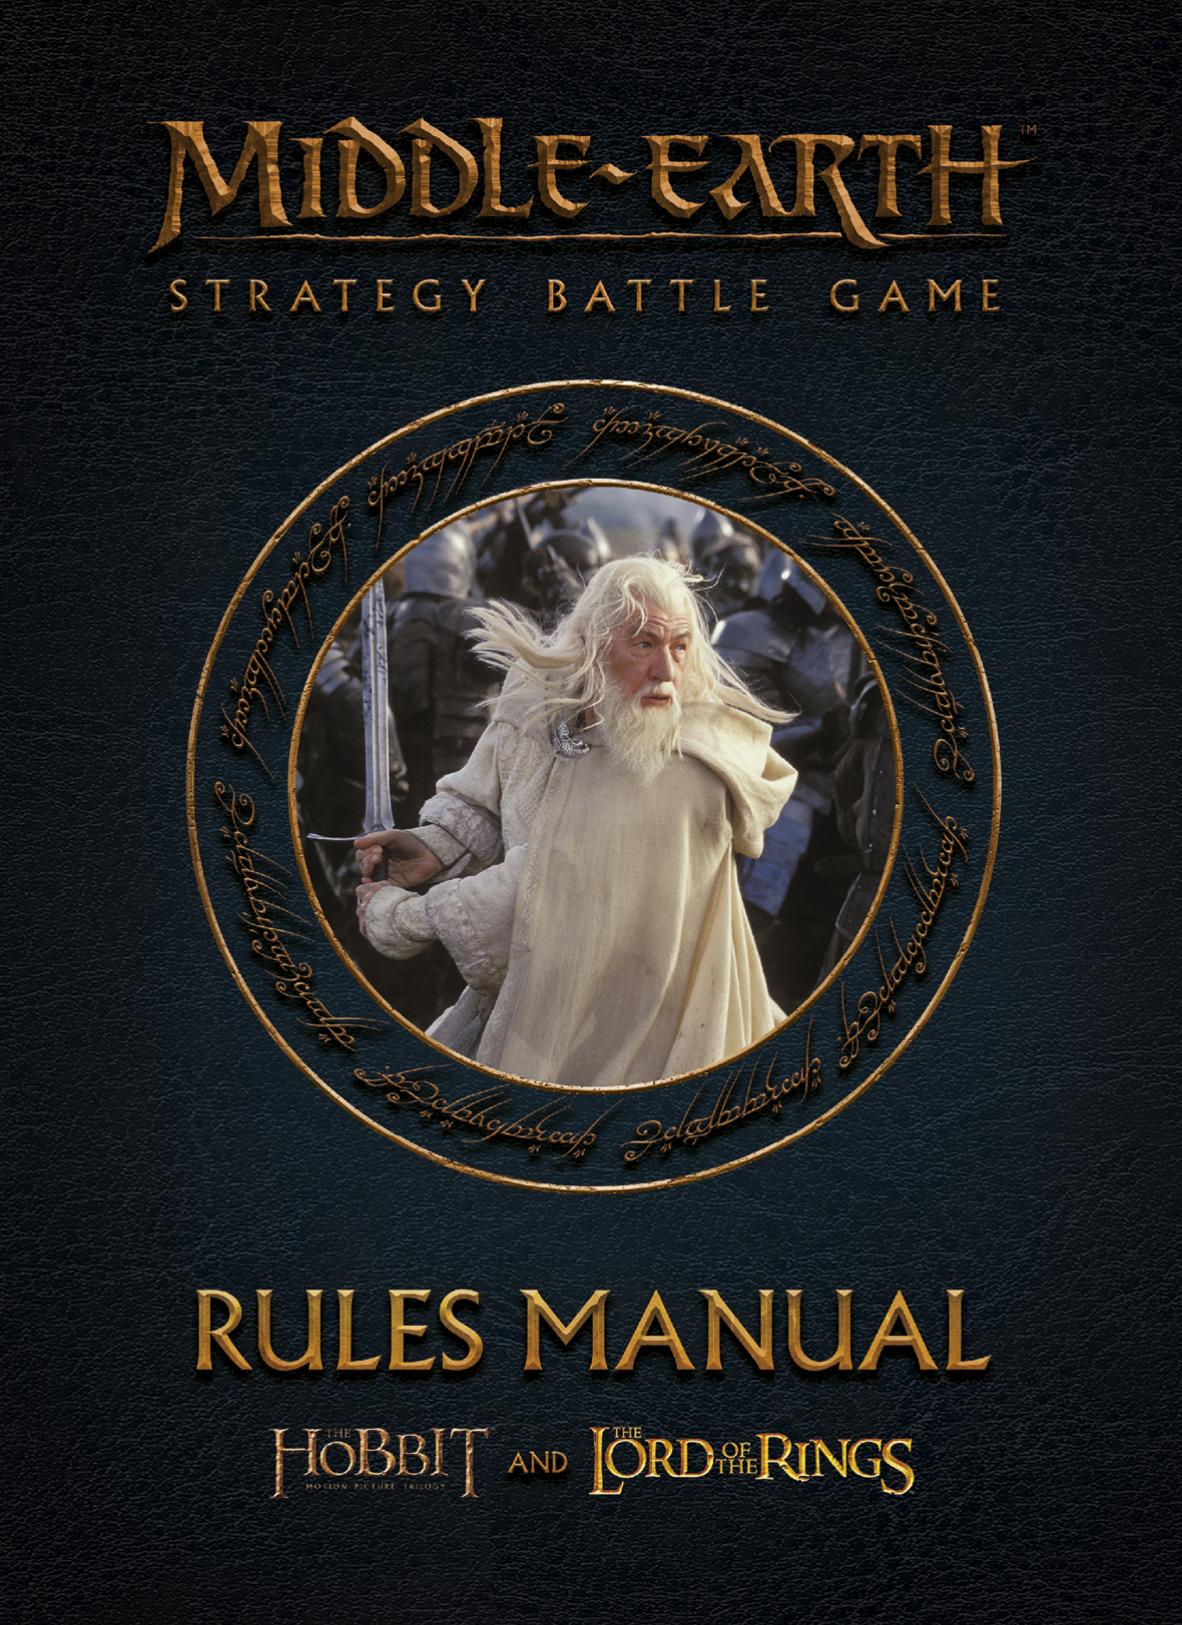 Middle-earth Rules Manual